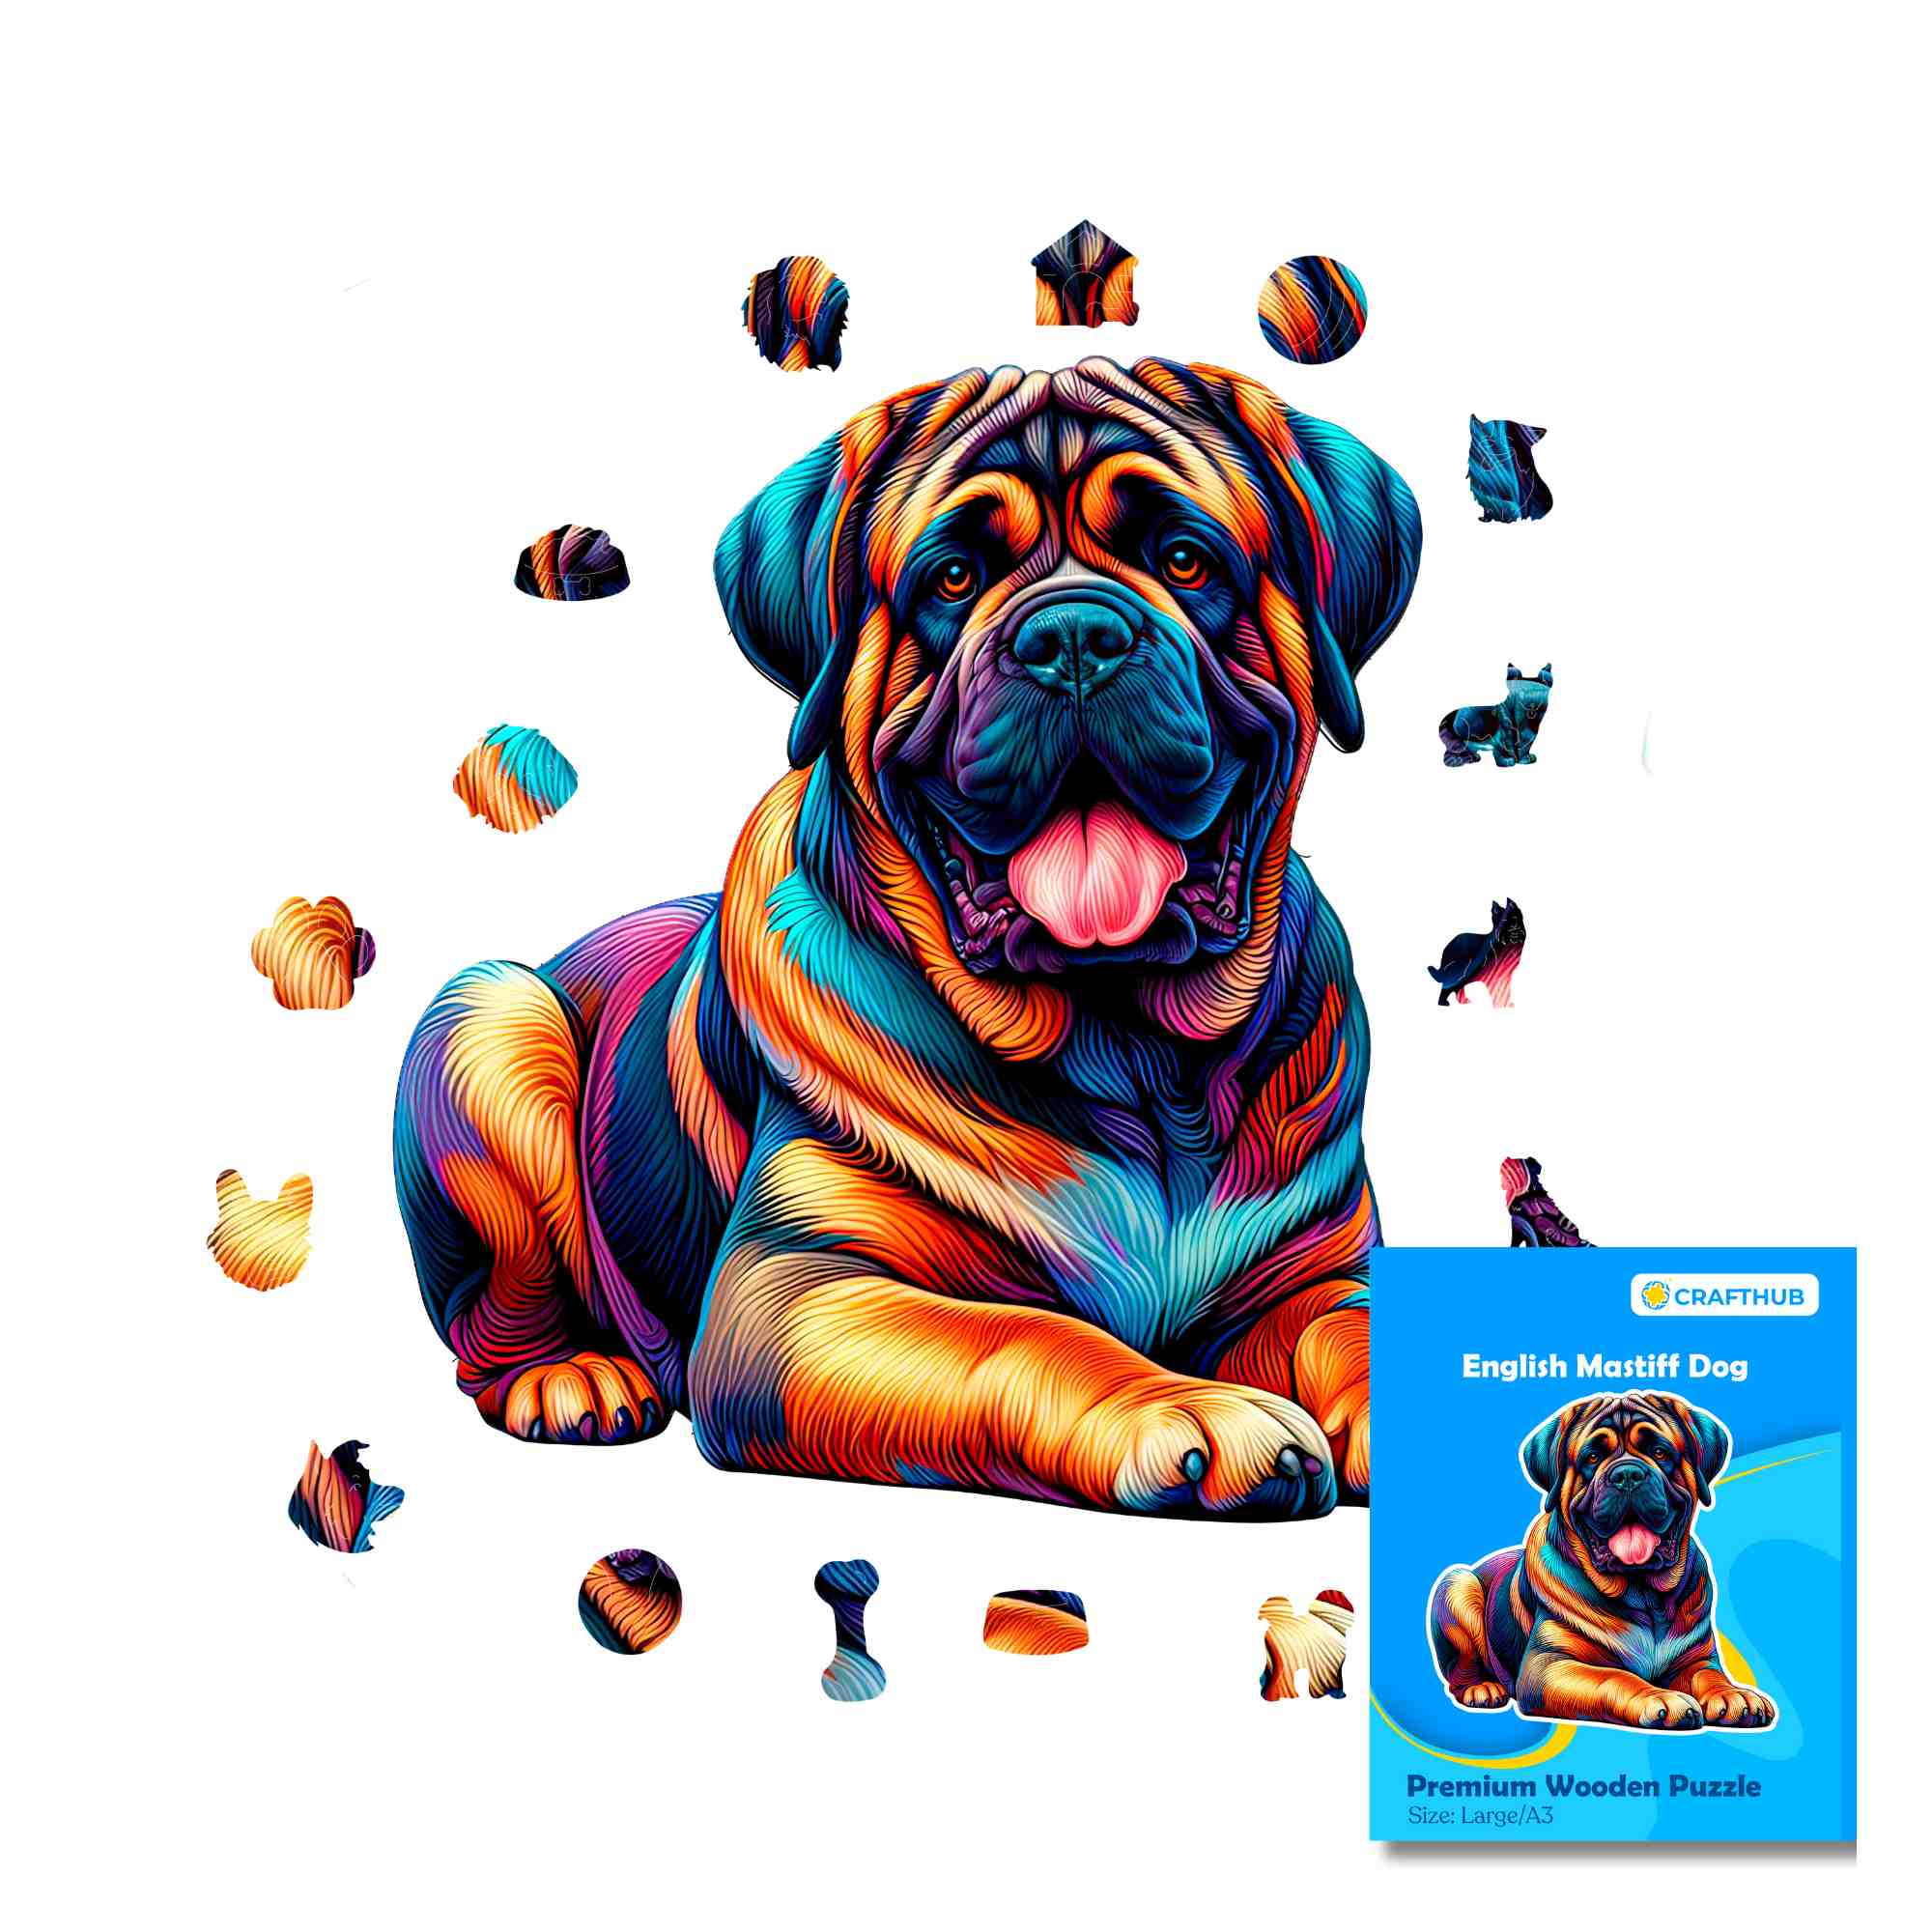 Animal Jigsaw Puzzle > Wooden Jigsaw Puzzle > Jigsaw Puzzle A4 English Mastiff Dog - Jigsaw Puzzle